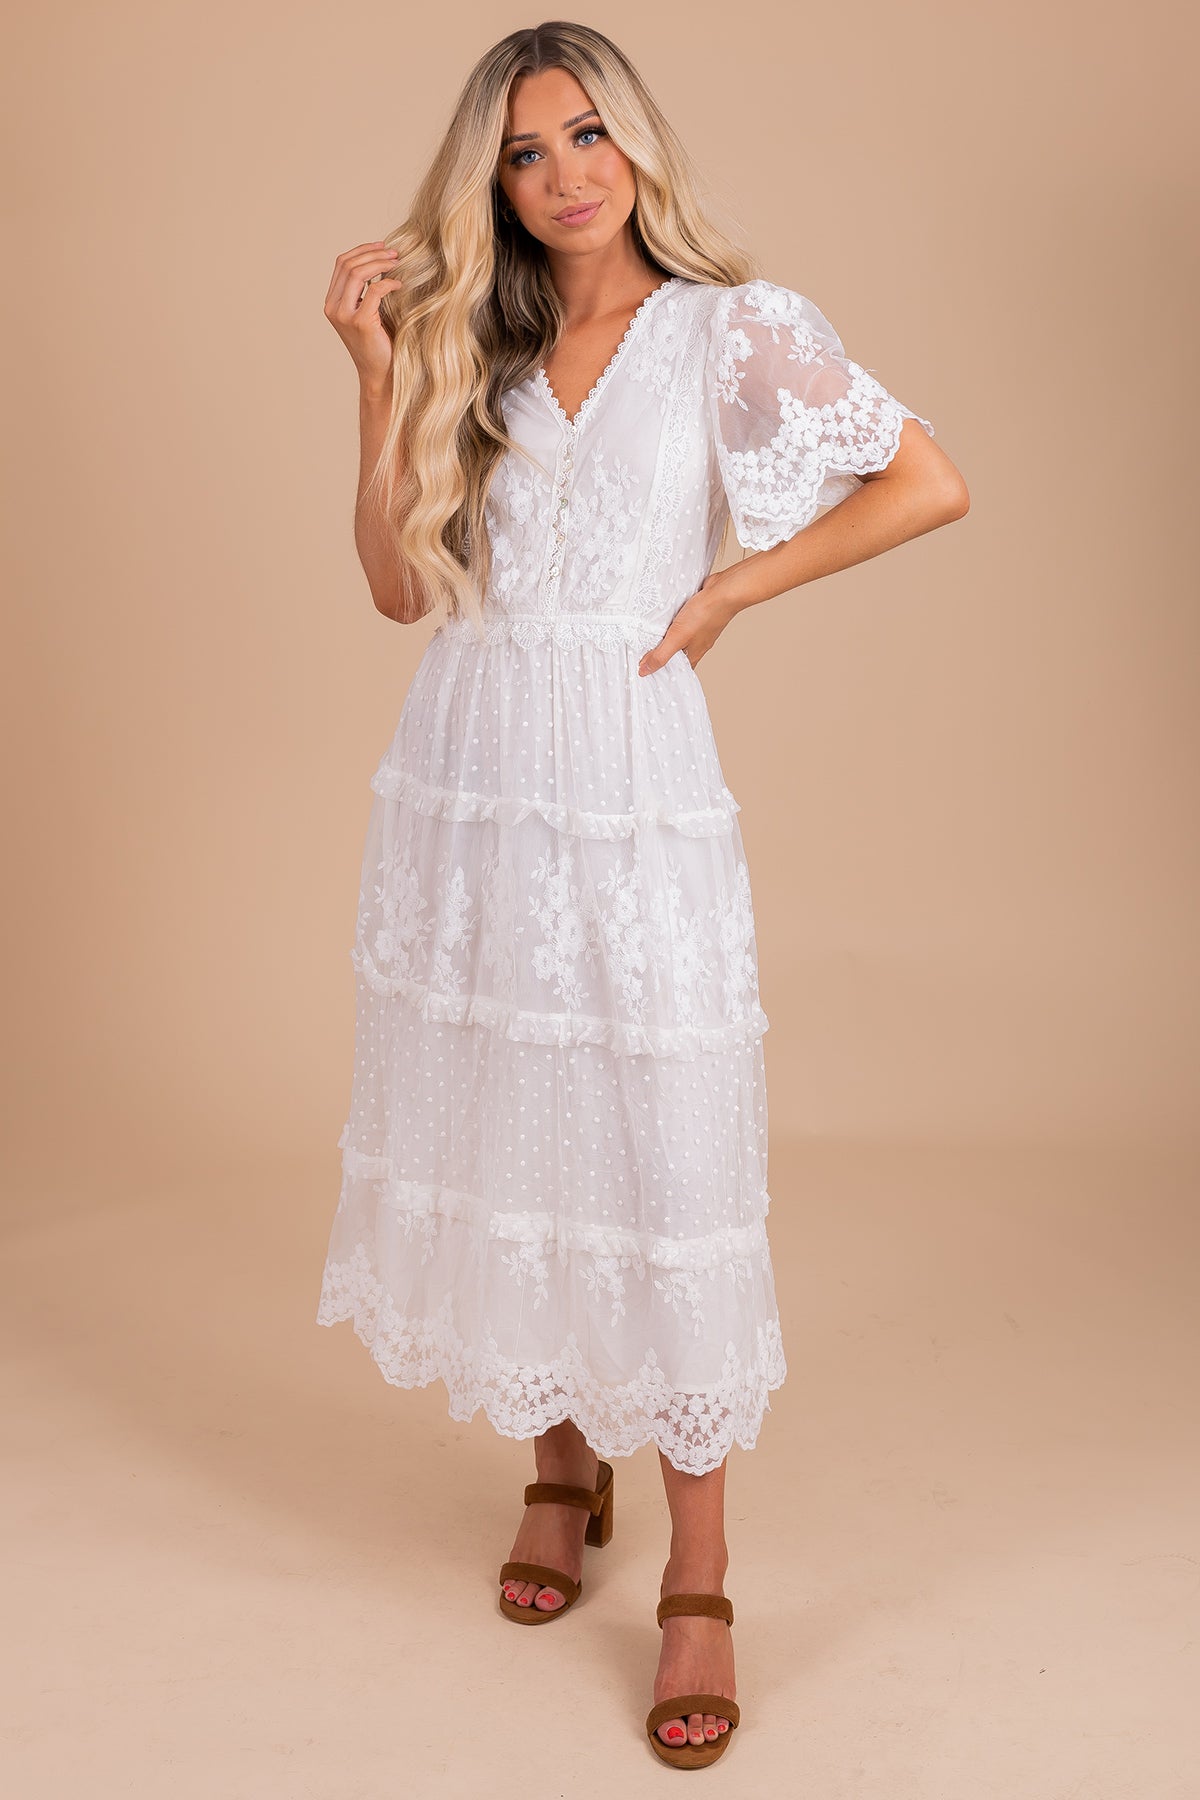 Tiered White Dress with Flowy Short Sleeve for Women